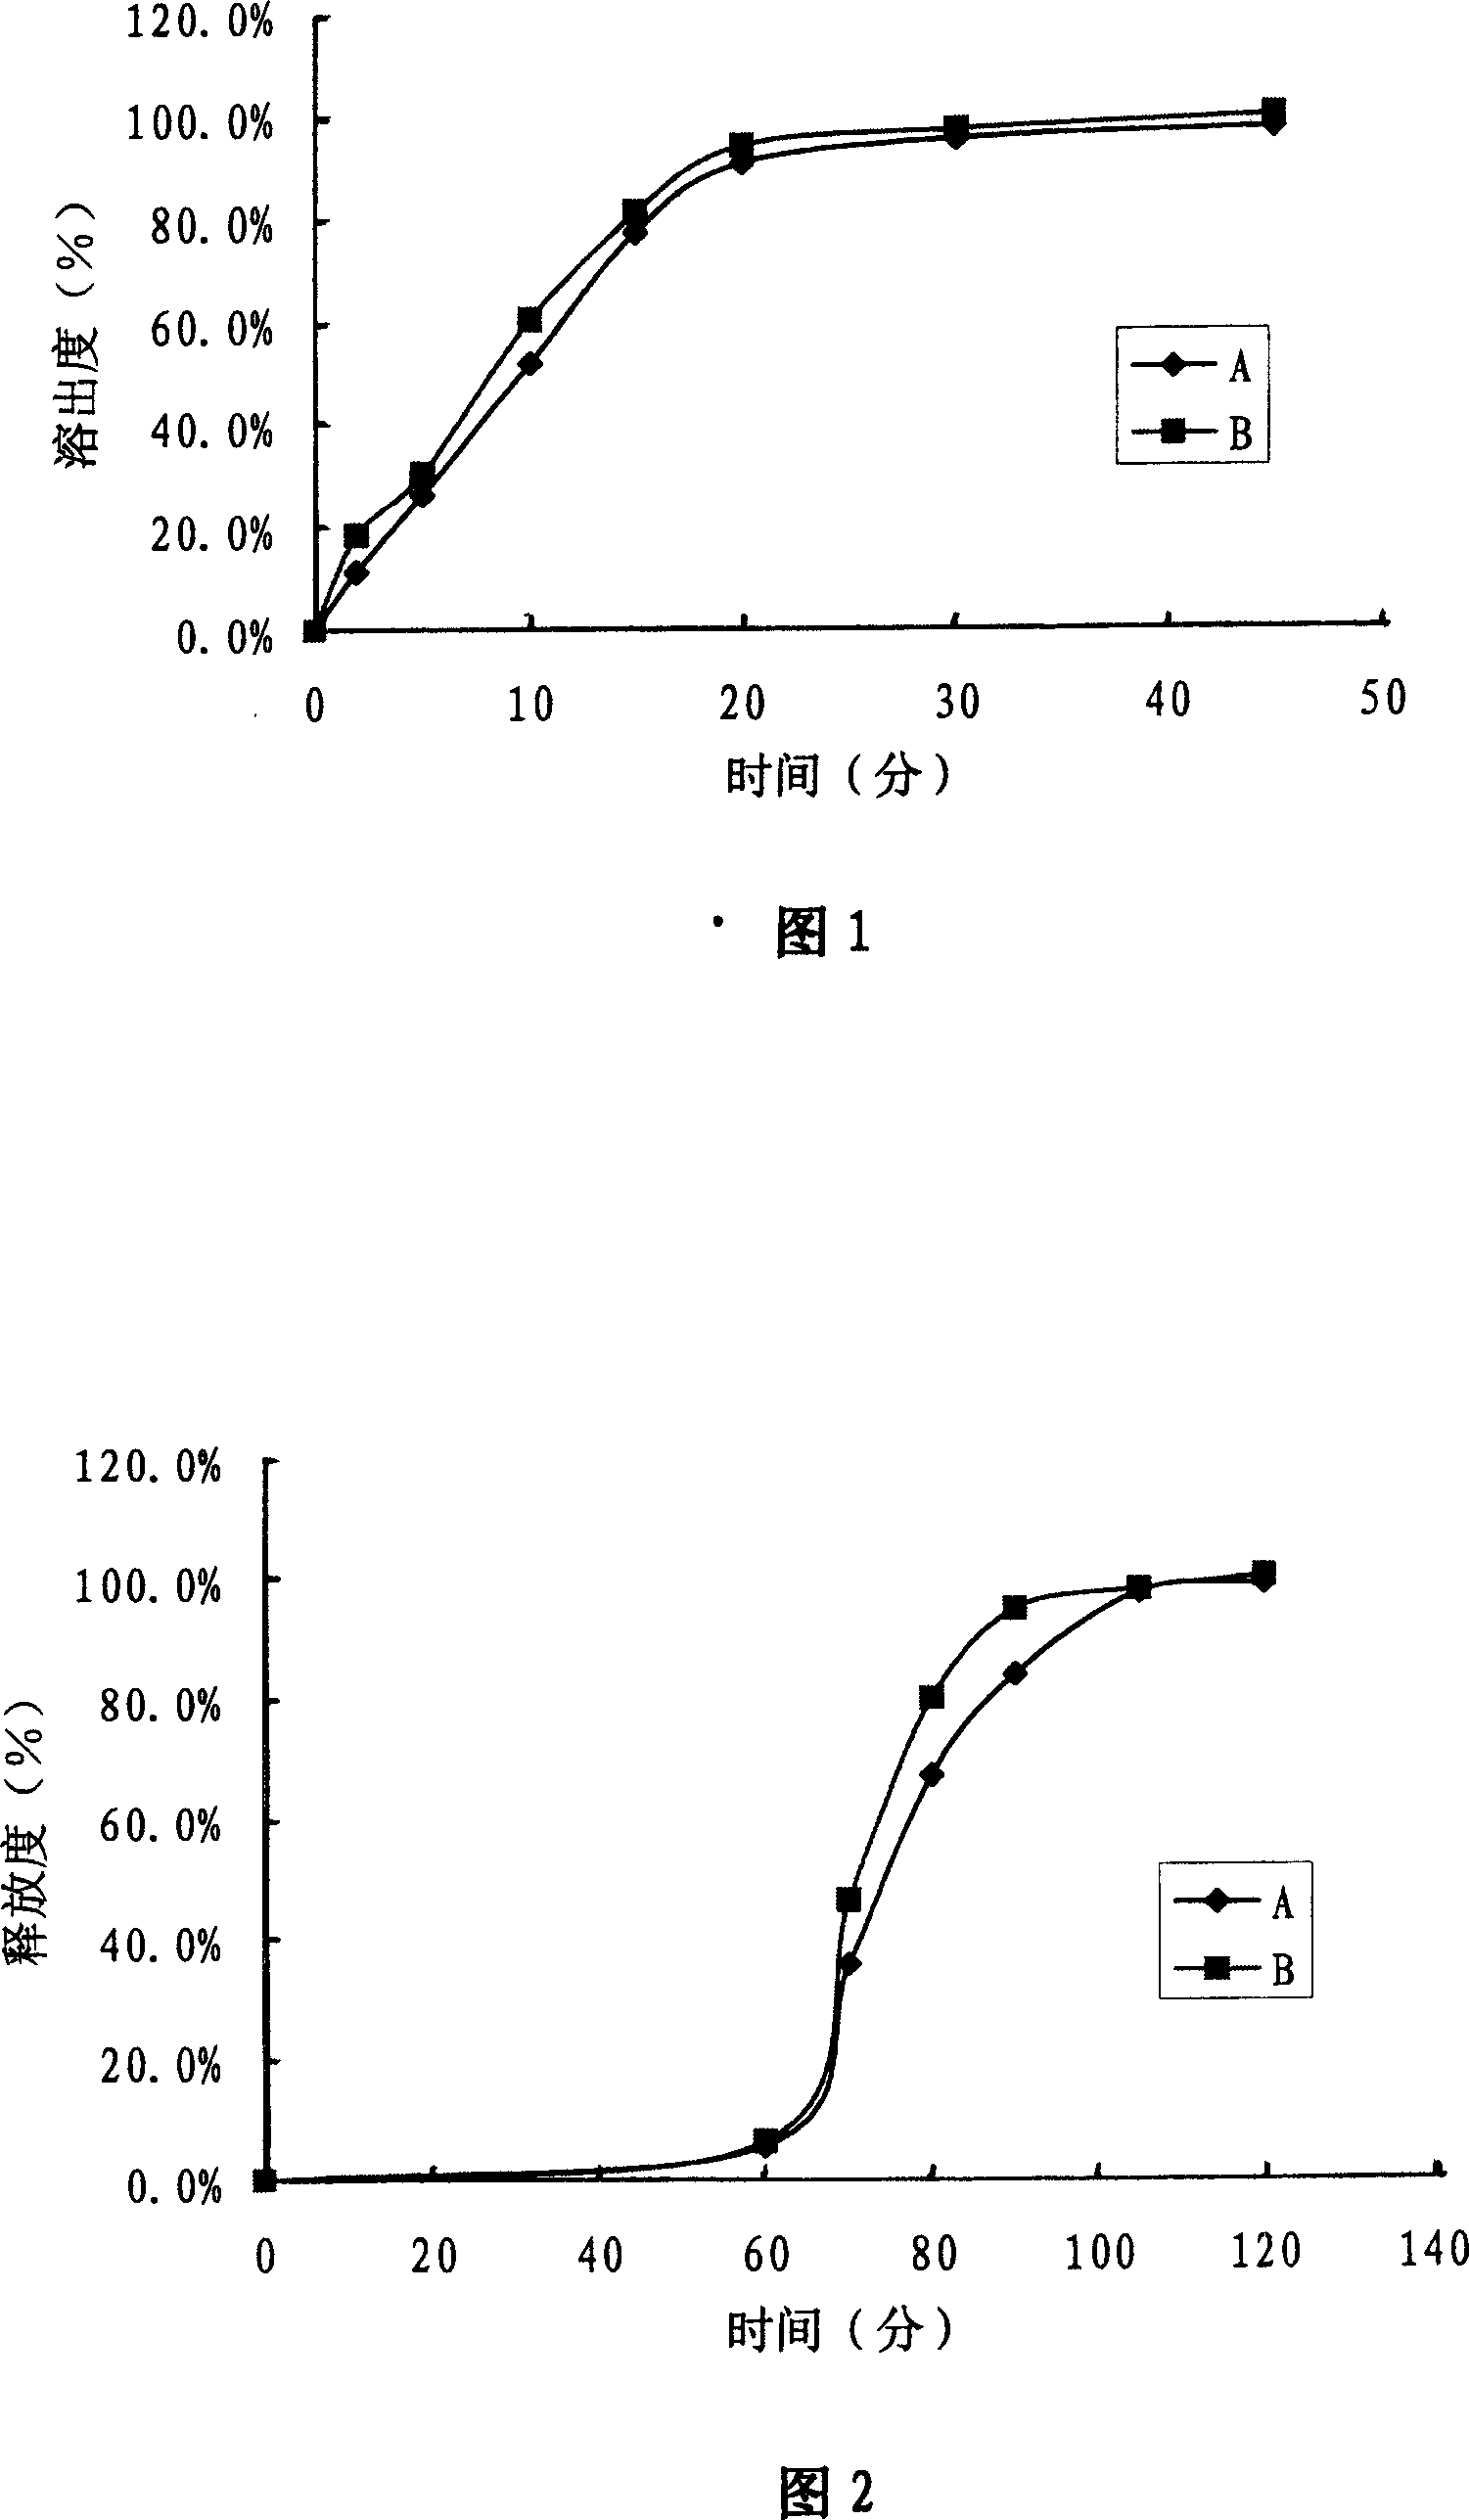 Oral solid preparation containing ambroxol hydrochloride and guaifenesin active components